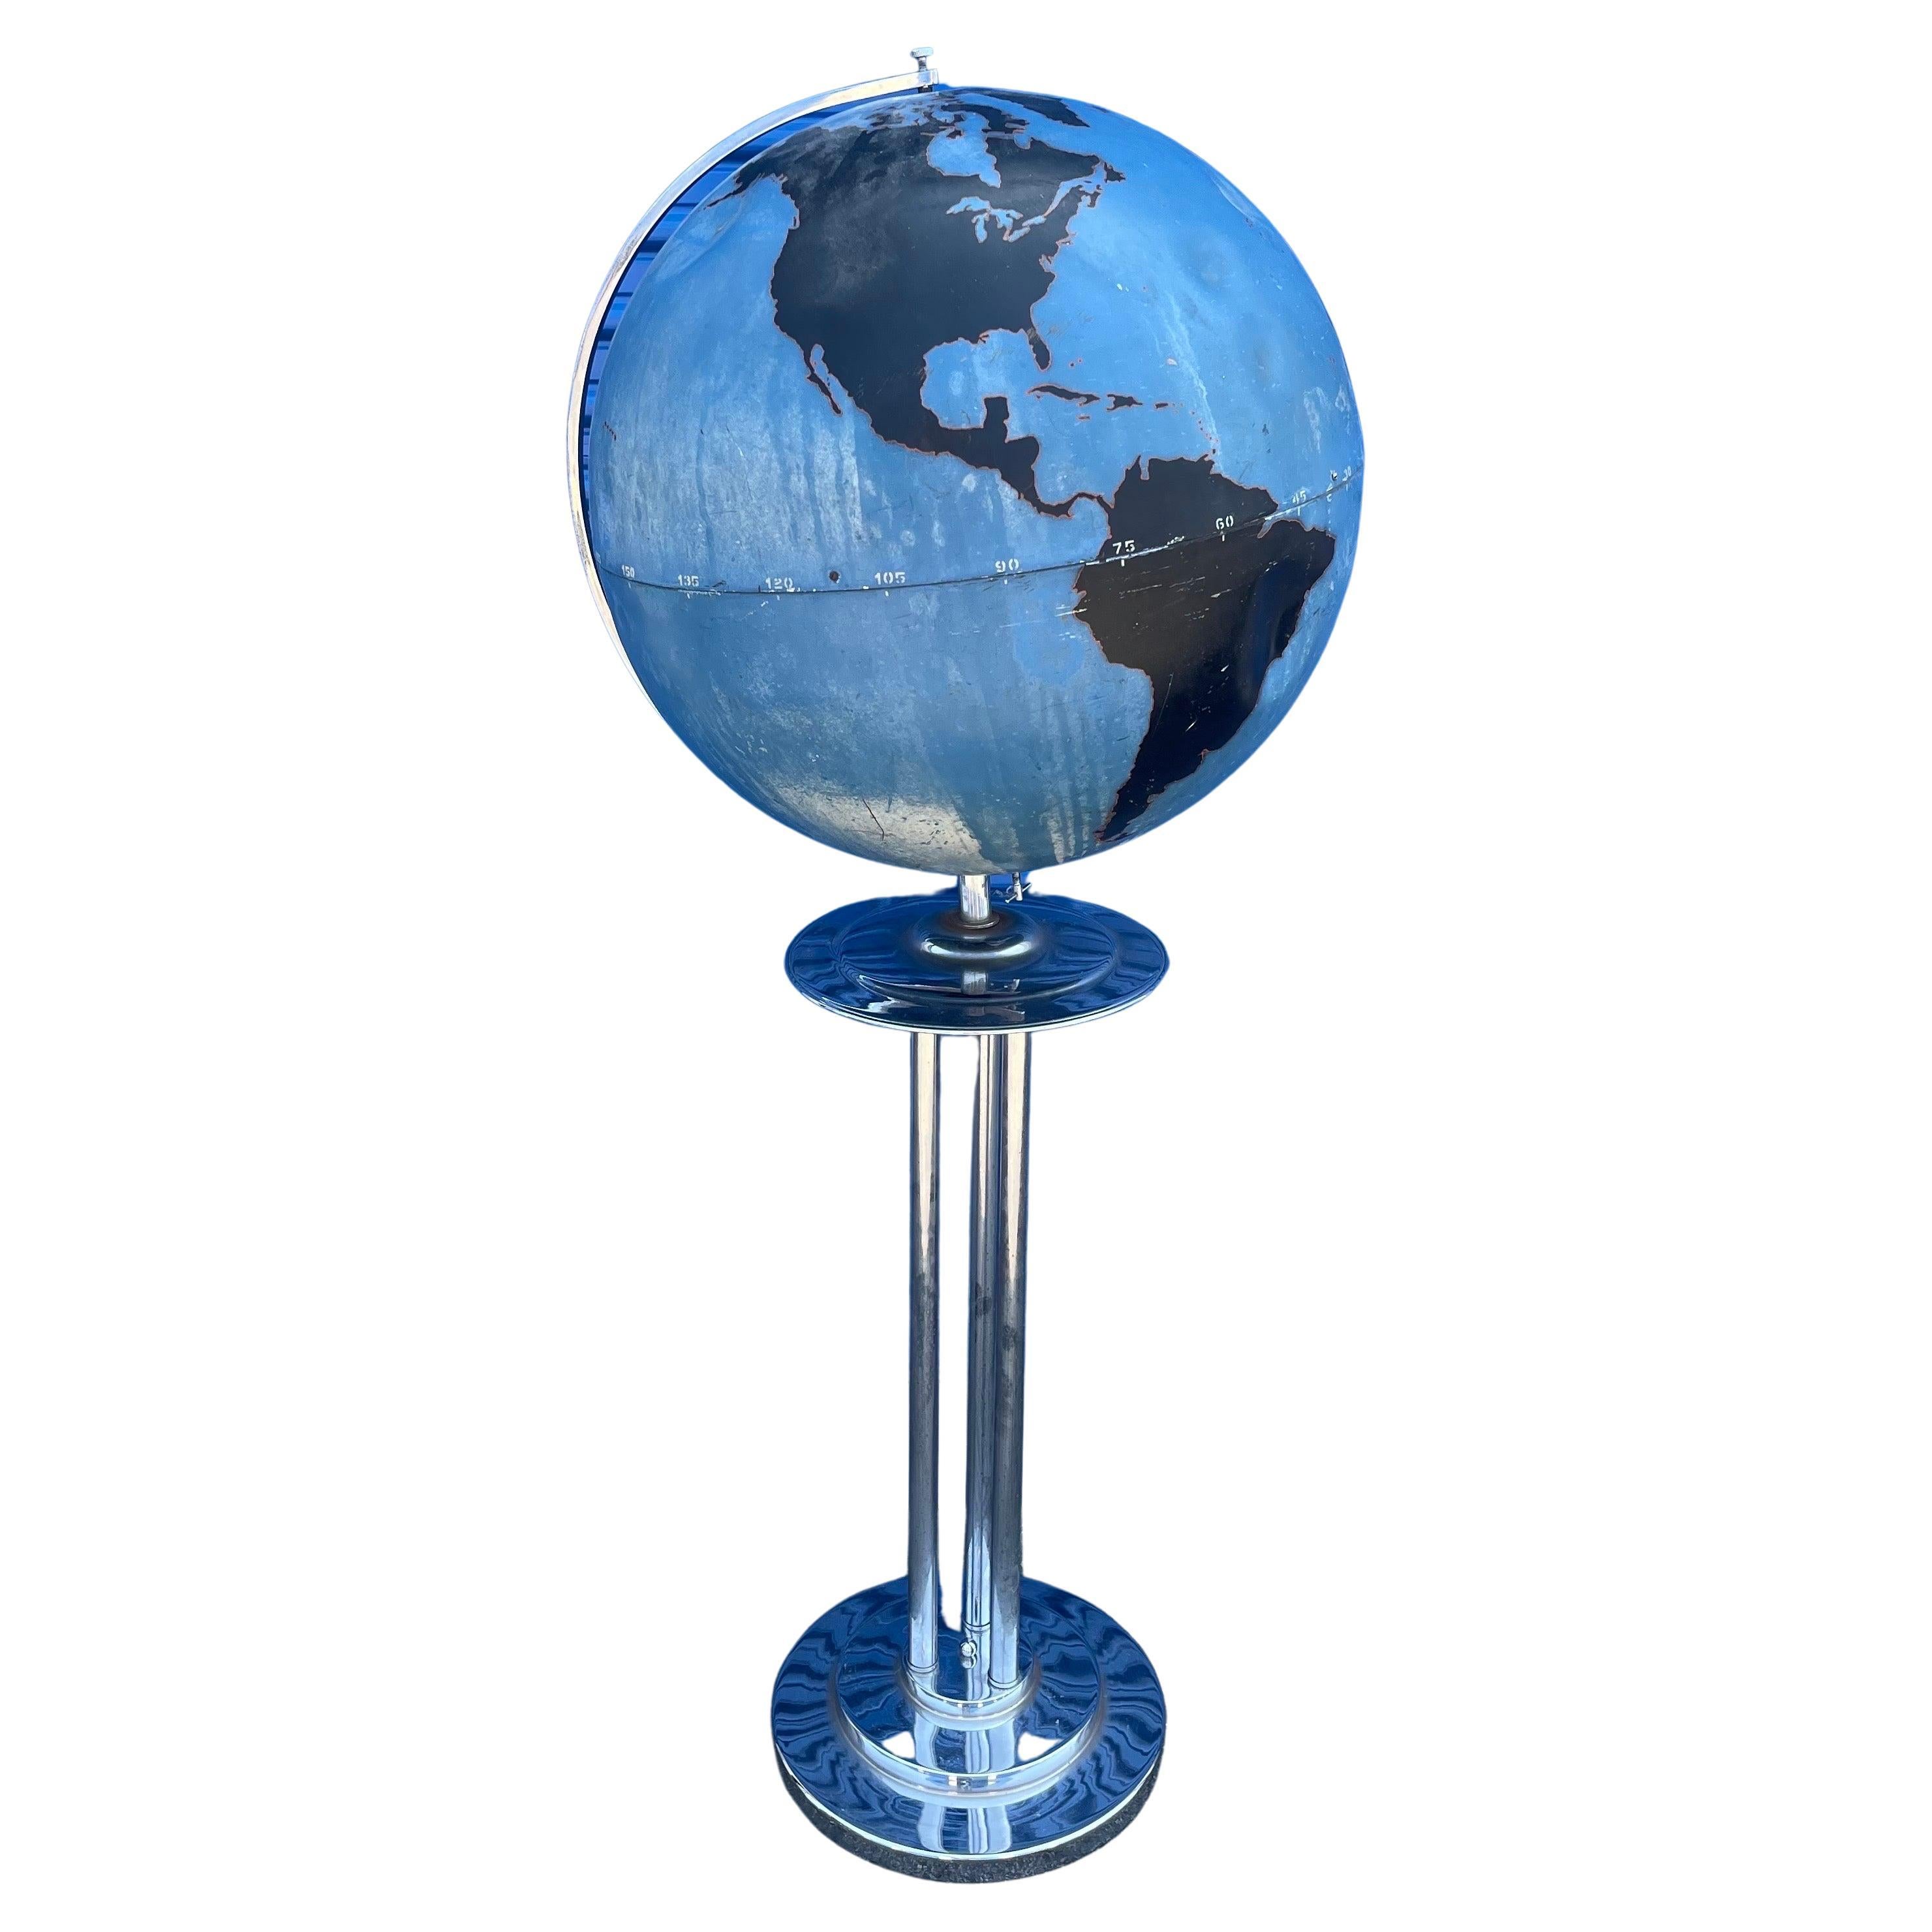 Rare art deco WWII military strategy chalk teaching globe by Denoyer-Geppert with period chrome stand, circa 1940s. The globe is in good condition with original paint; there are several dents and dings on the sphere.  The globe is attached to a